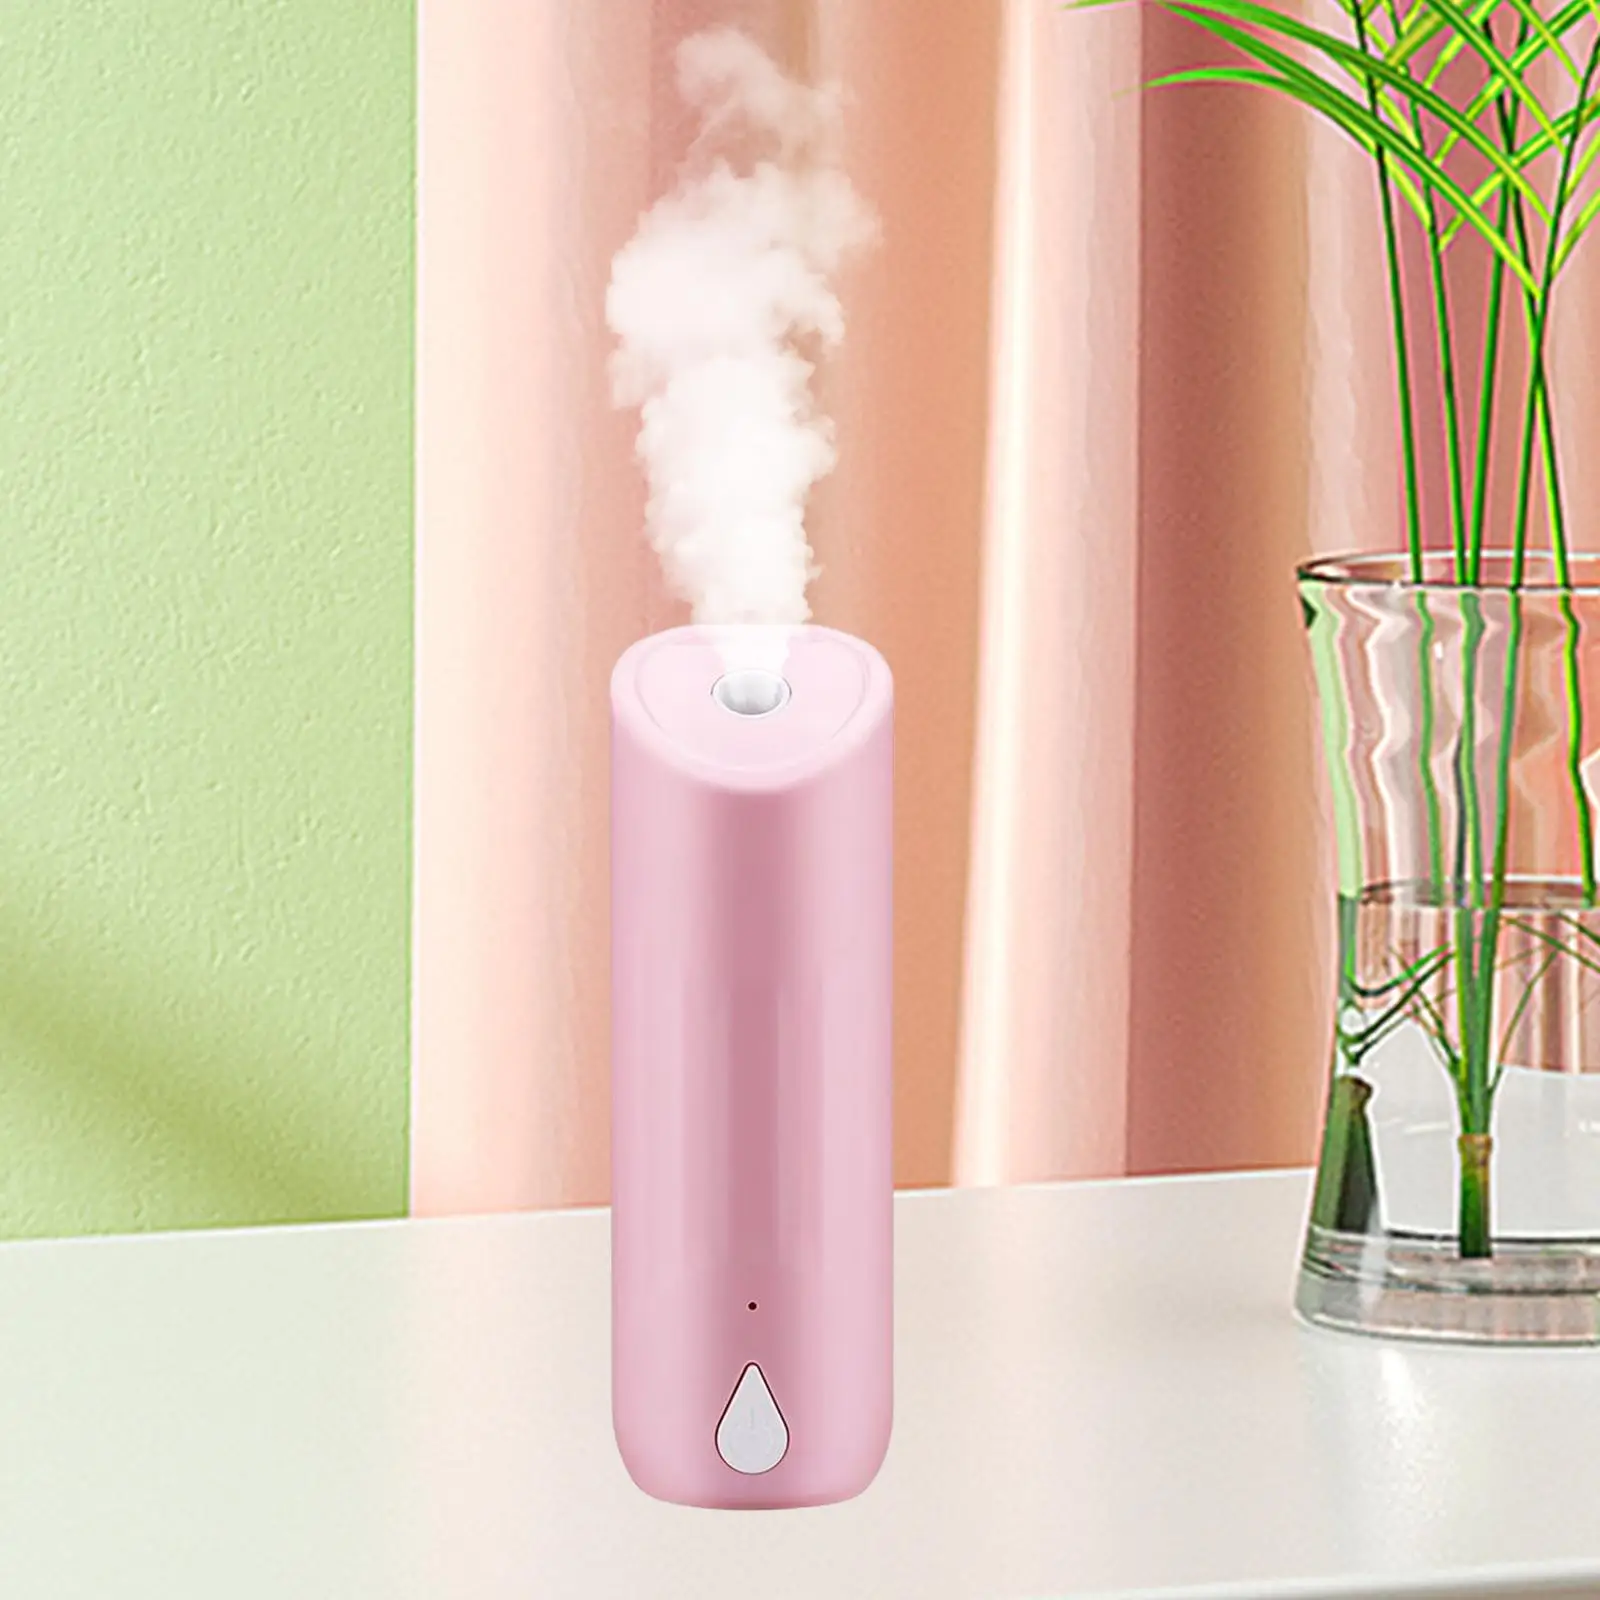 Automatic Fragrance Diffuser Spray Dispenser Noiseless Wall Mounted Air Humidifier Mist Sprayer for Living Room Office